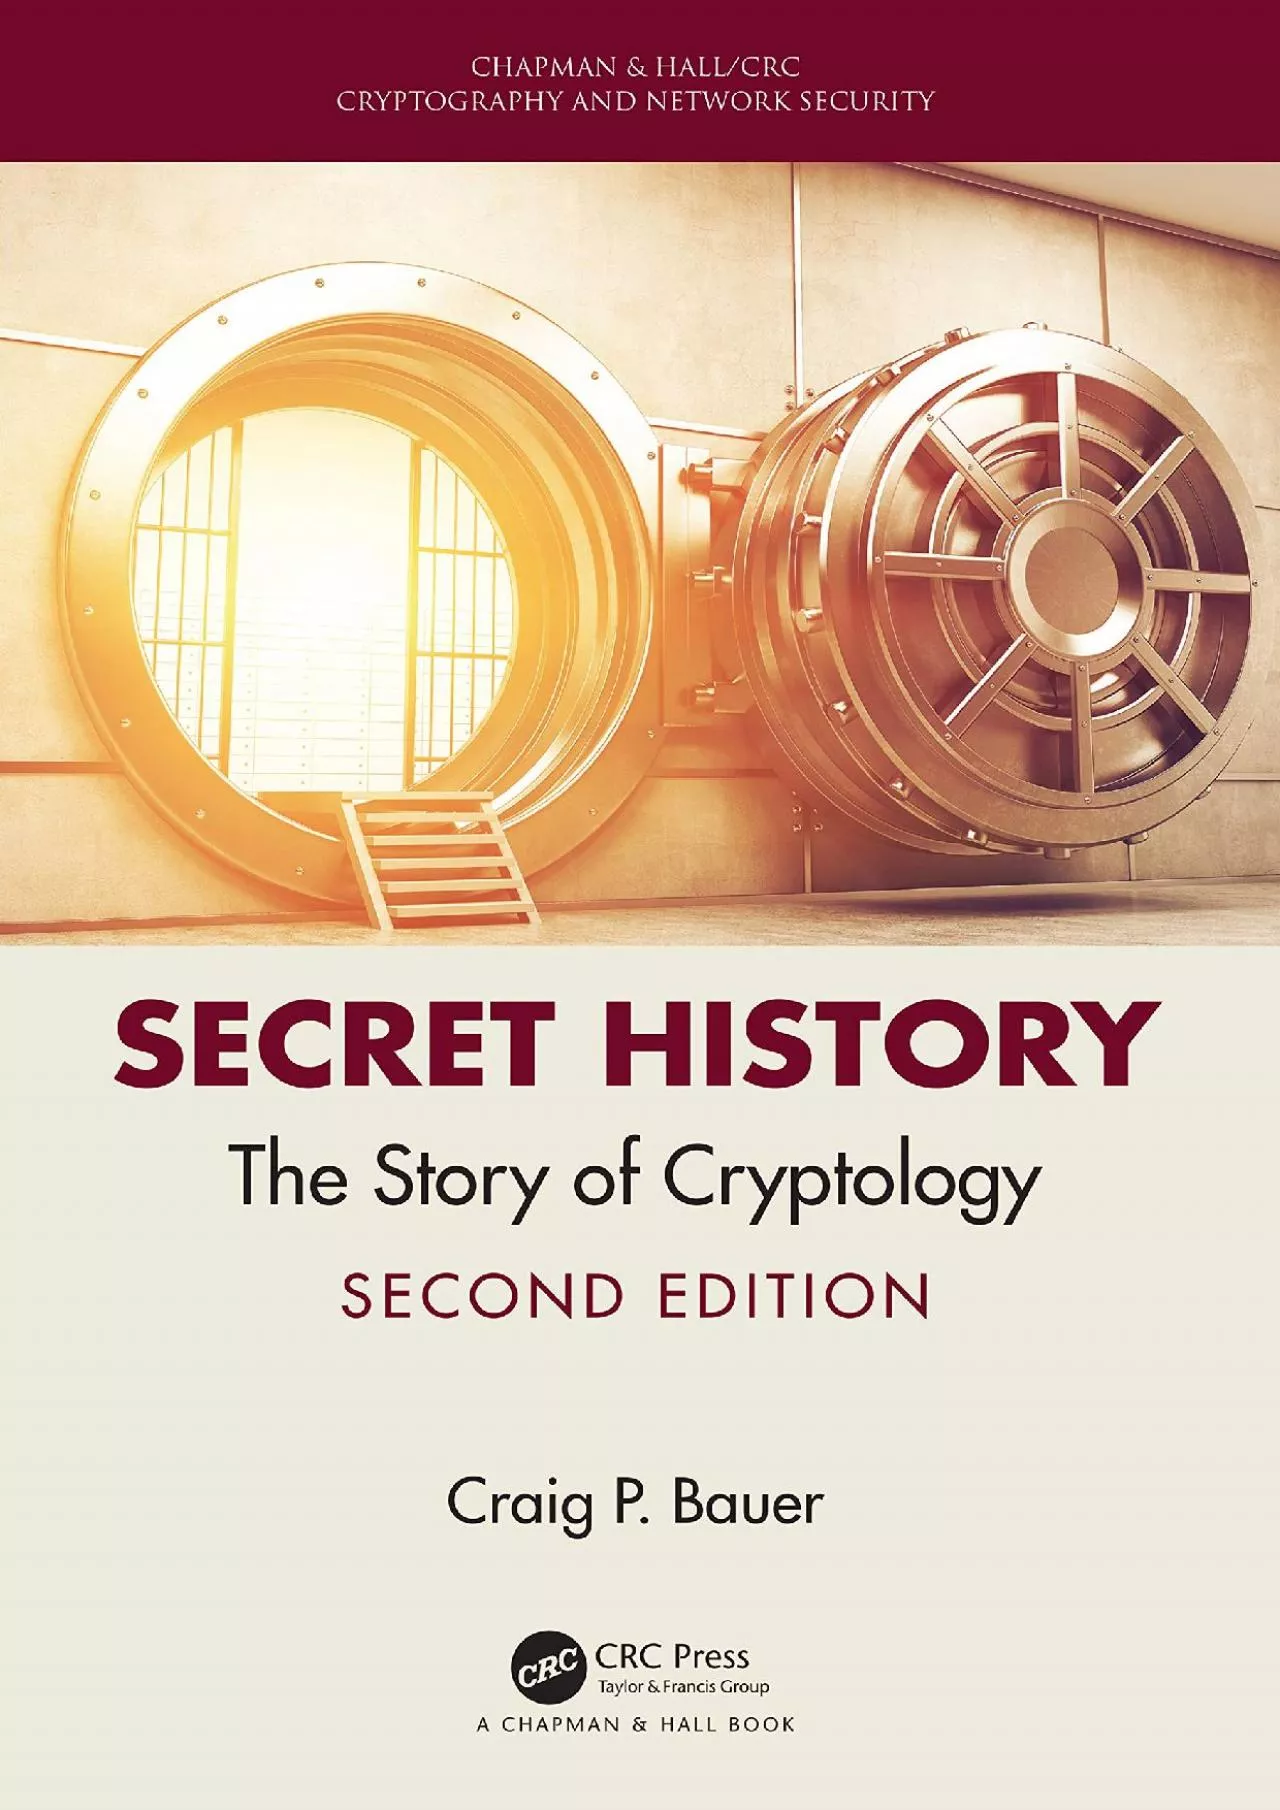 (BOOS)-Secret History: The Story of Cryptology (Chapman  Hall/CRC Cryptography and Network